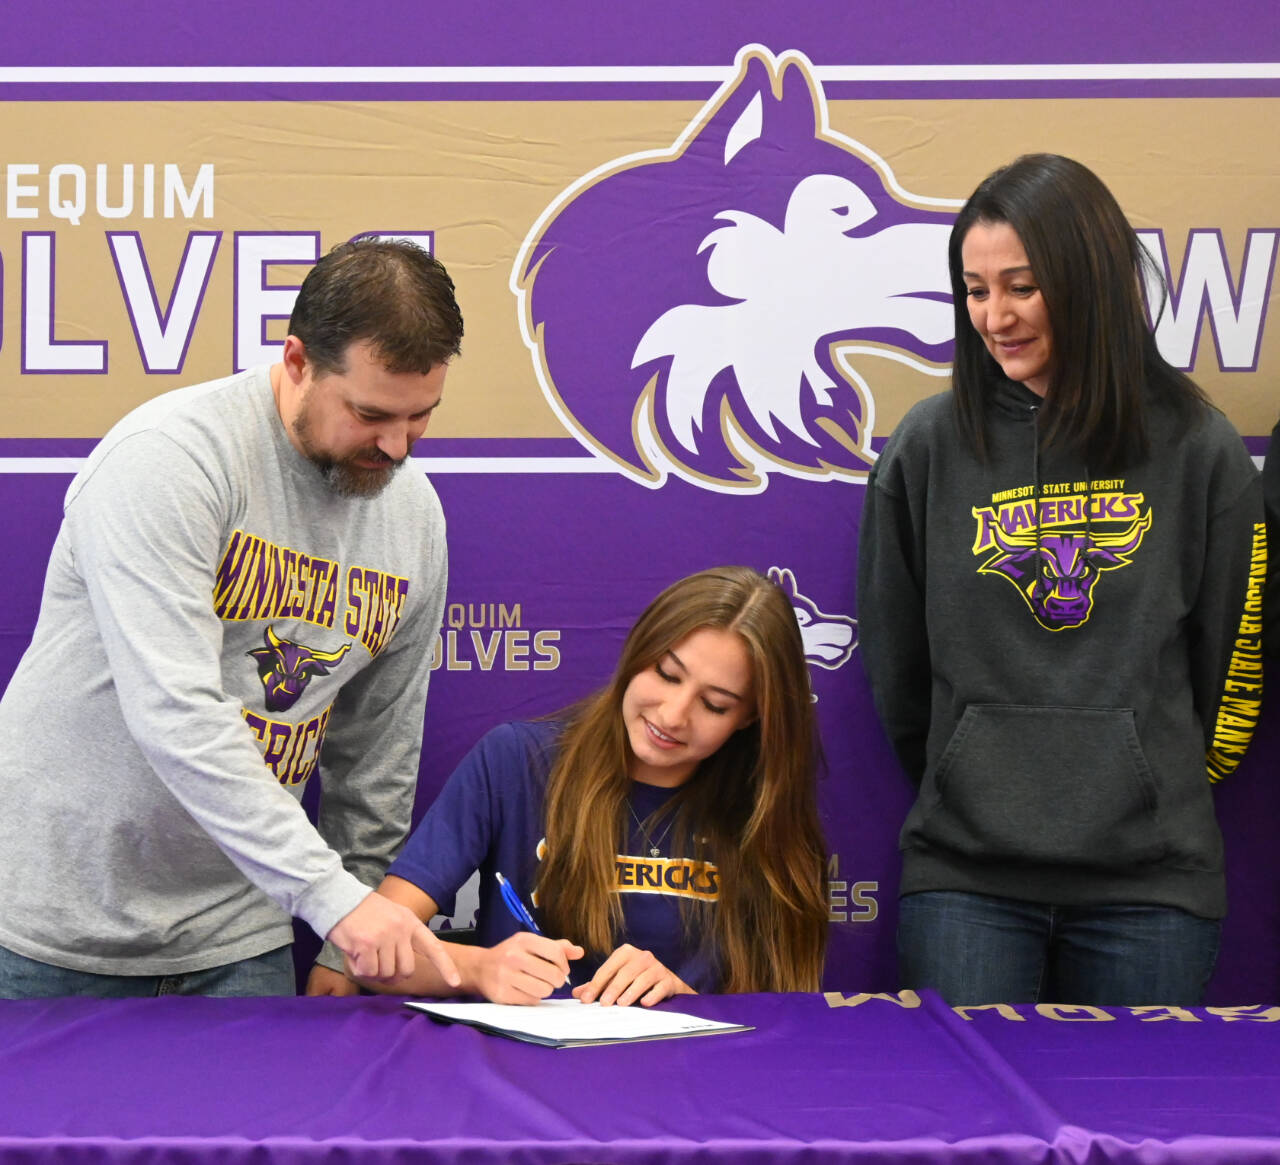 Sequim Gazette photo by Michael Dashiell / With parents Travis and Kristen Johnson looking on, Sequim High School senior Taryn Johnson last week signs a letter of intent to play for Minnesota State University, Mankato.